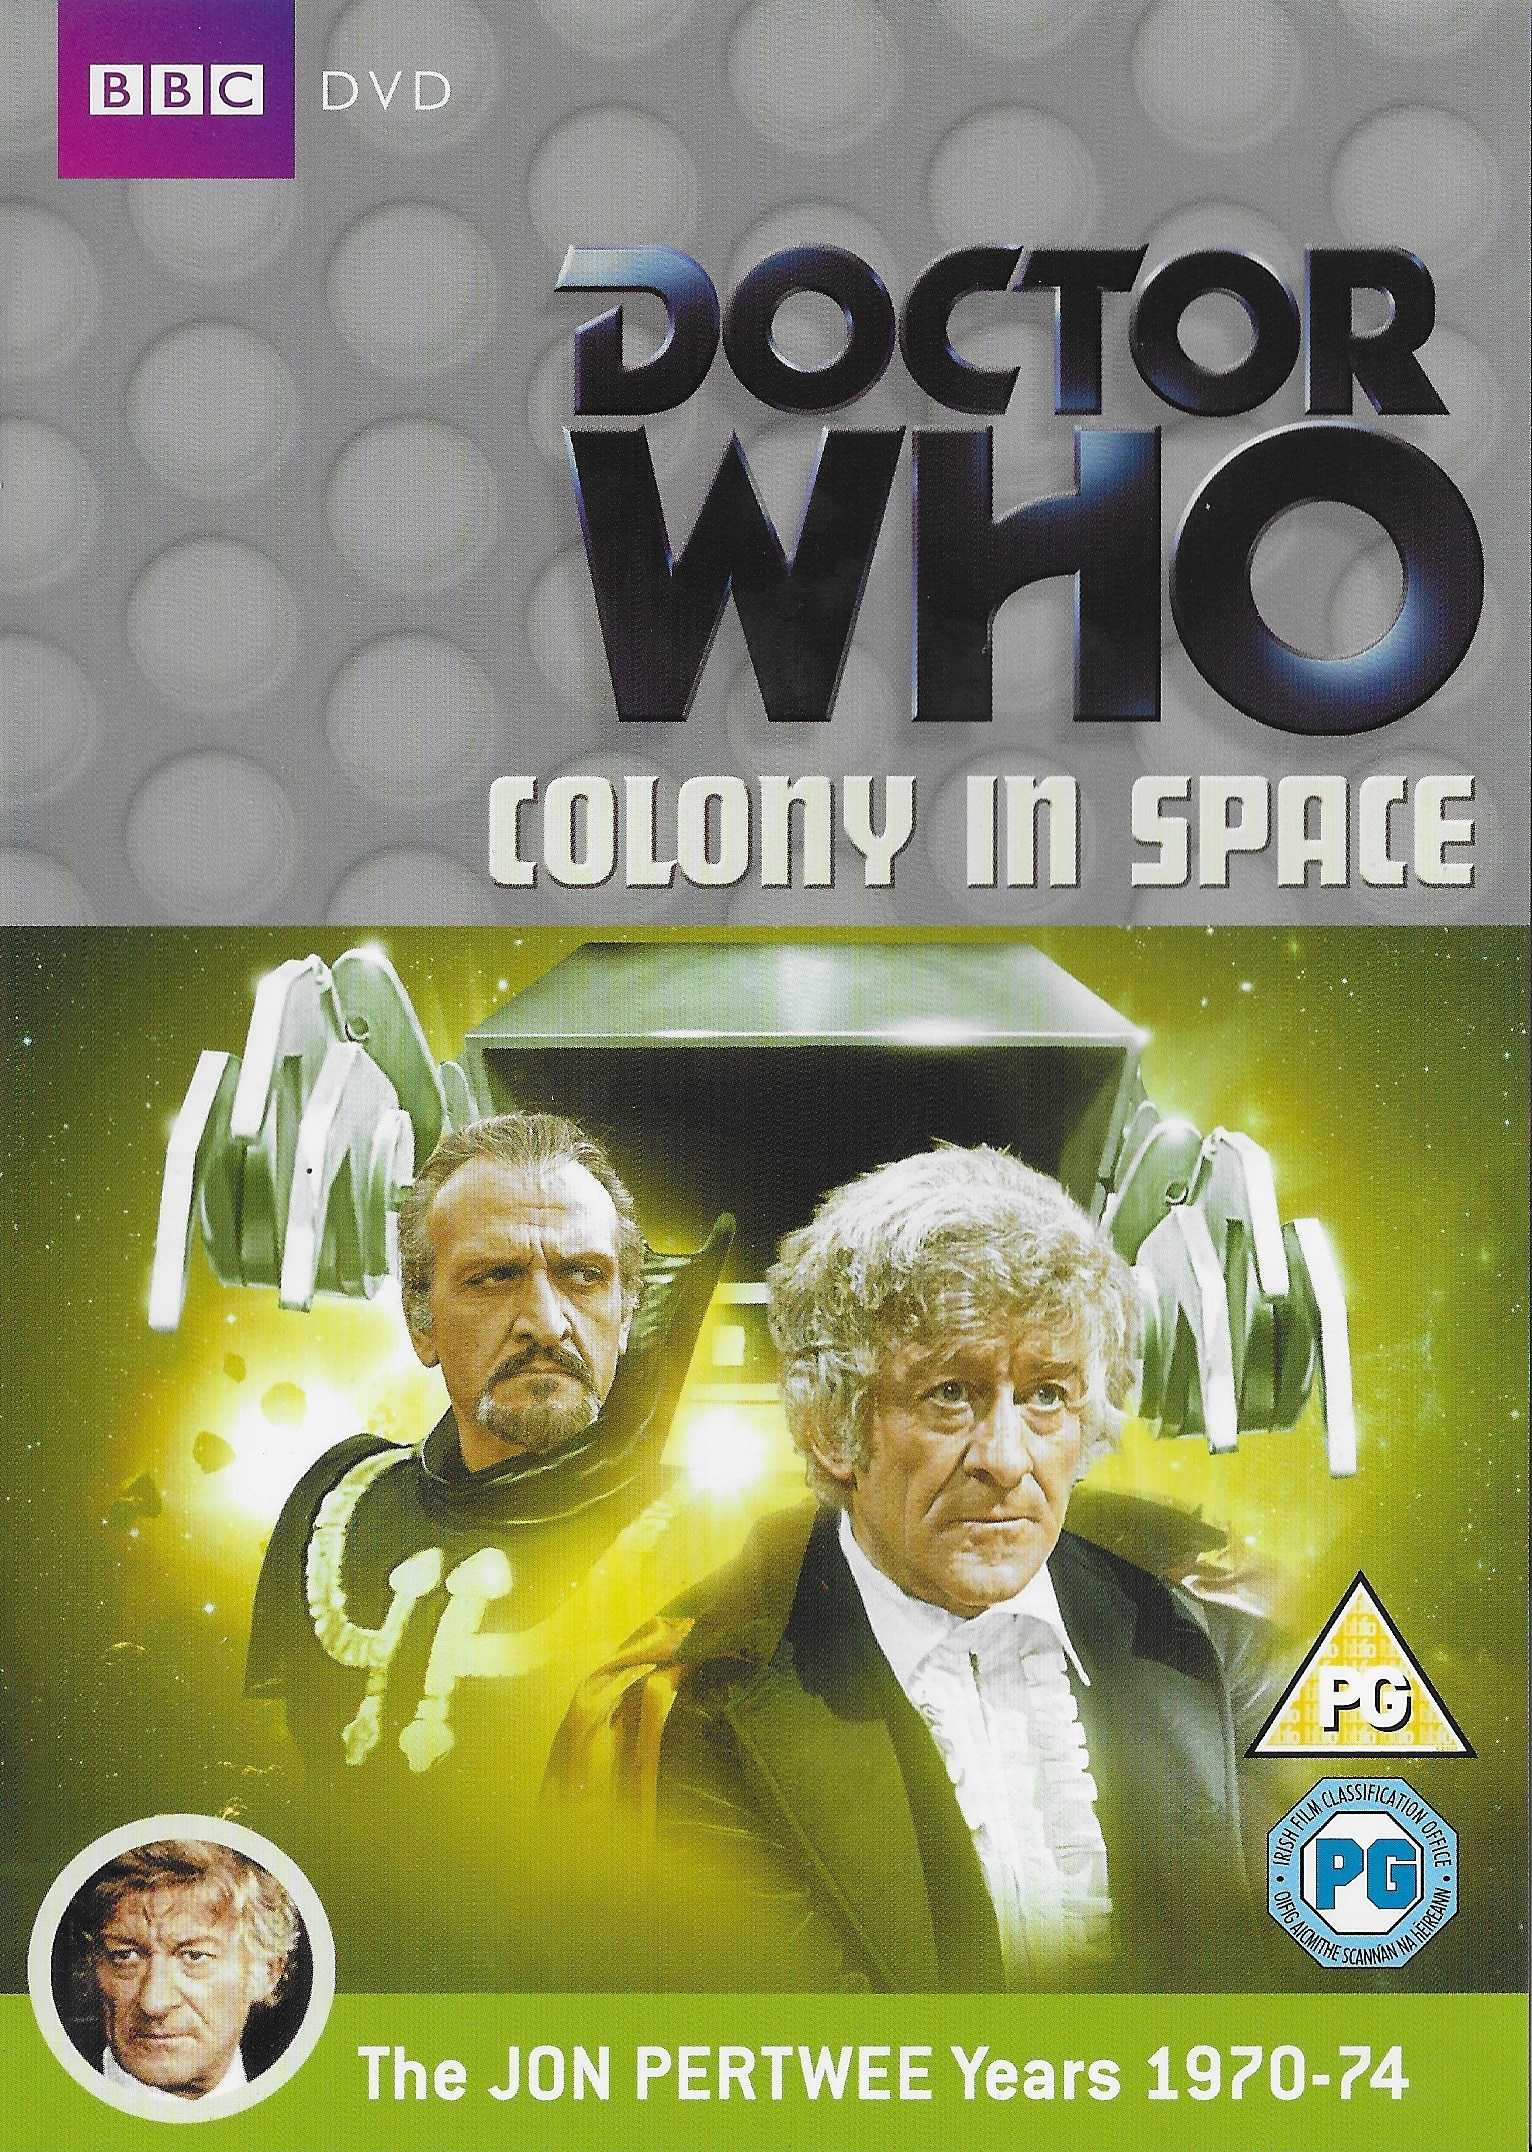 Picture of BBCDVD 3381 Doctor Who - Colony in space by artist Malcolm Hulke from the BBC records and Tapes library